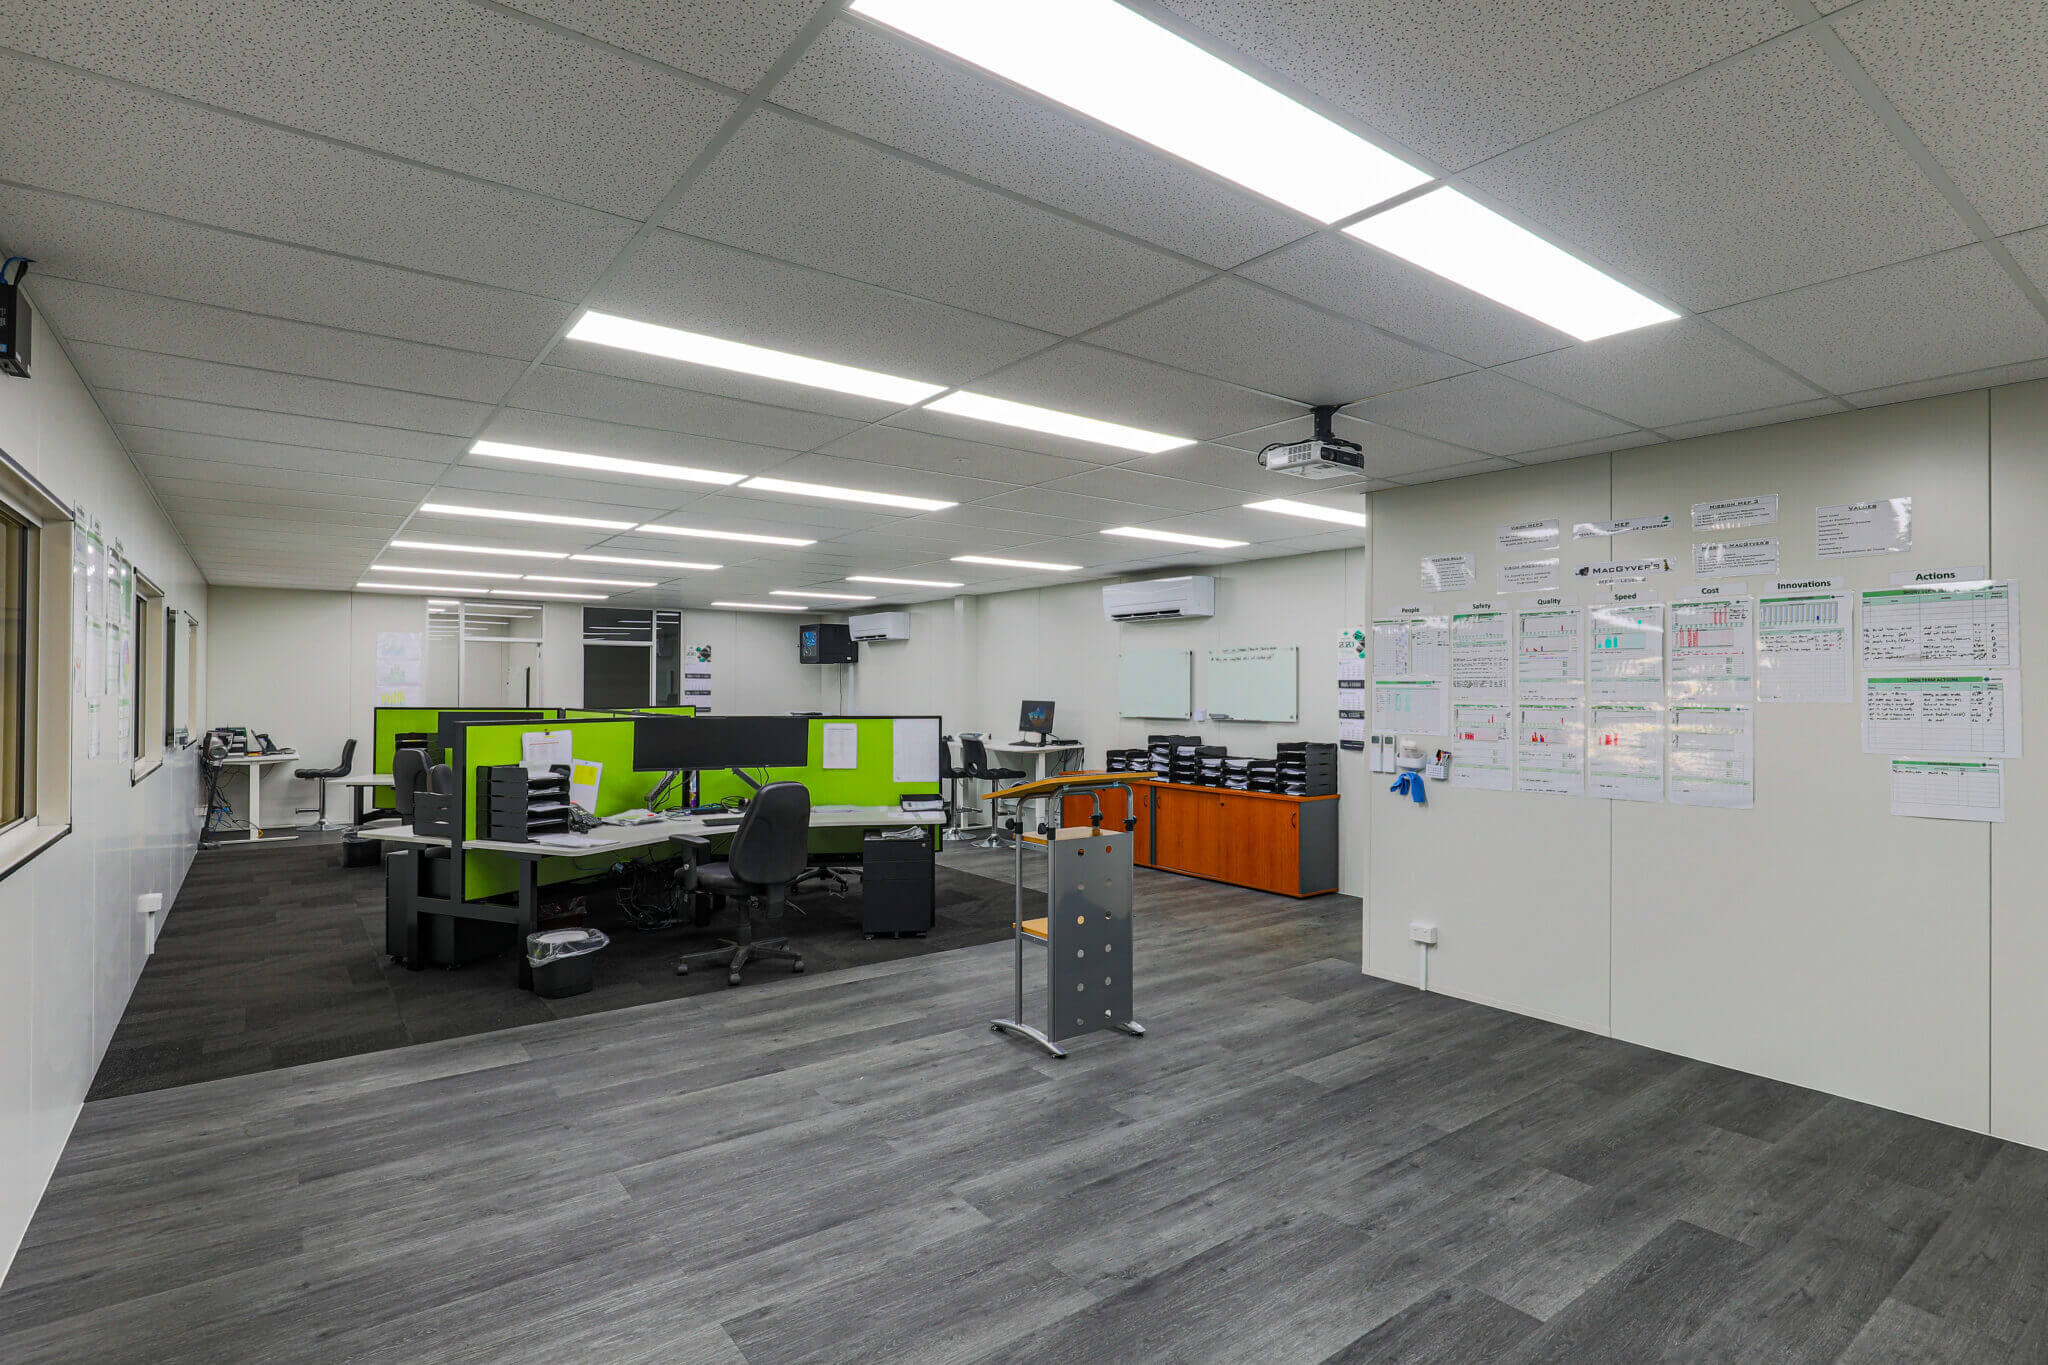 Office facility upgrades project for Multotec Company by Heighton